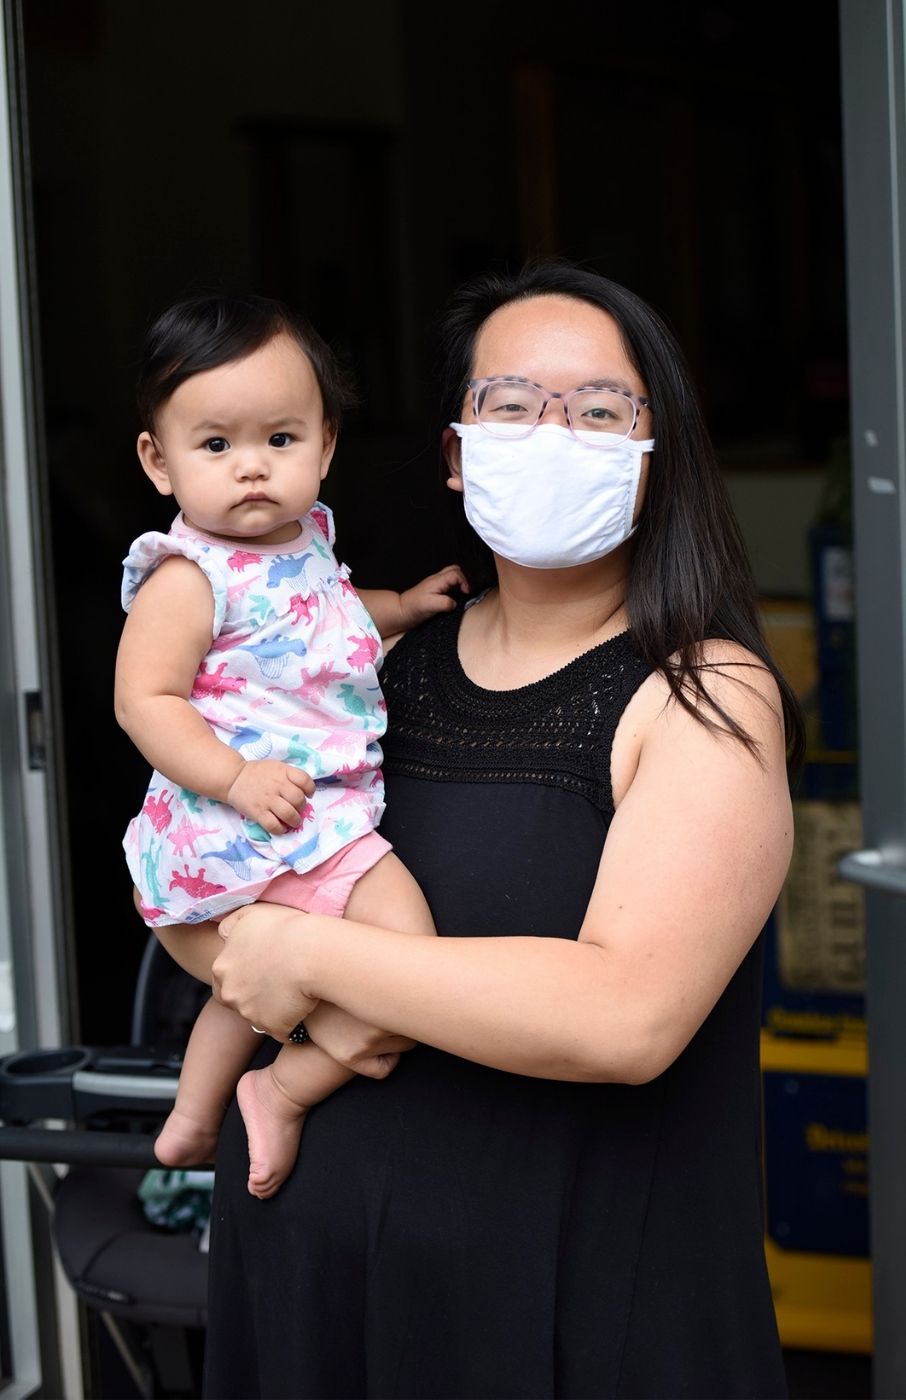 Lily Huang wearing a sleeveless black dress and a white face mask, holding her baby, who's wearing a blue and pink dress. Lily is standing in a doorway. Behind her is a dark room.